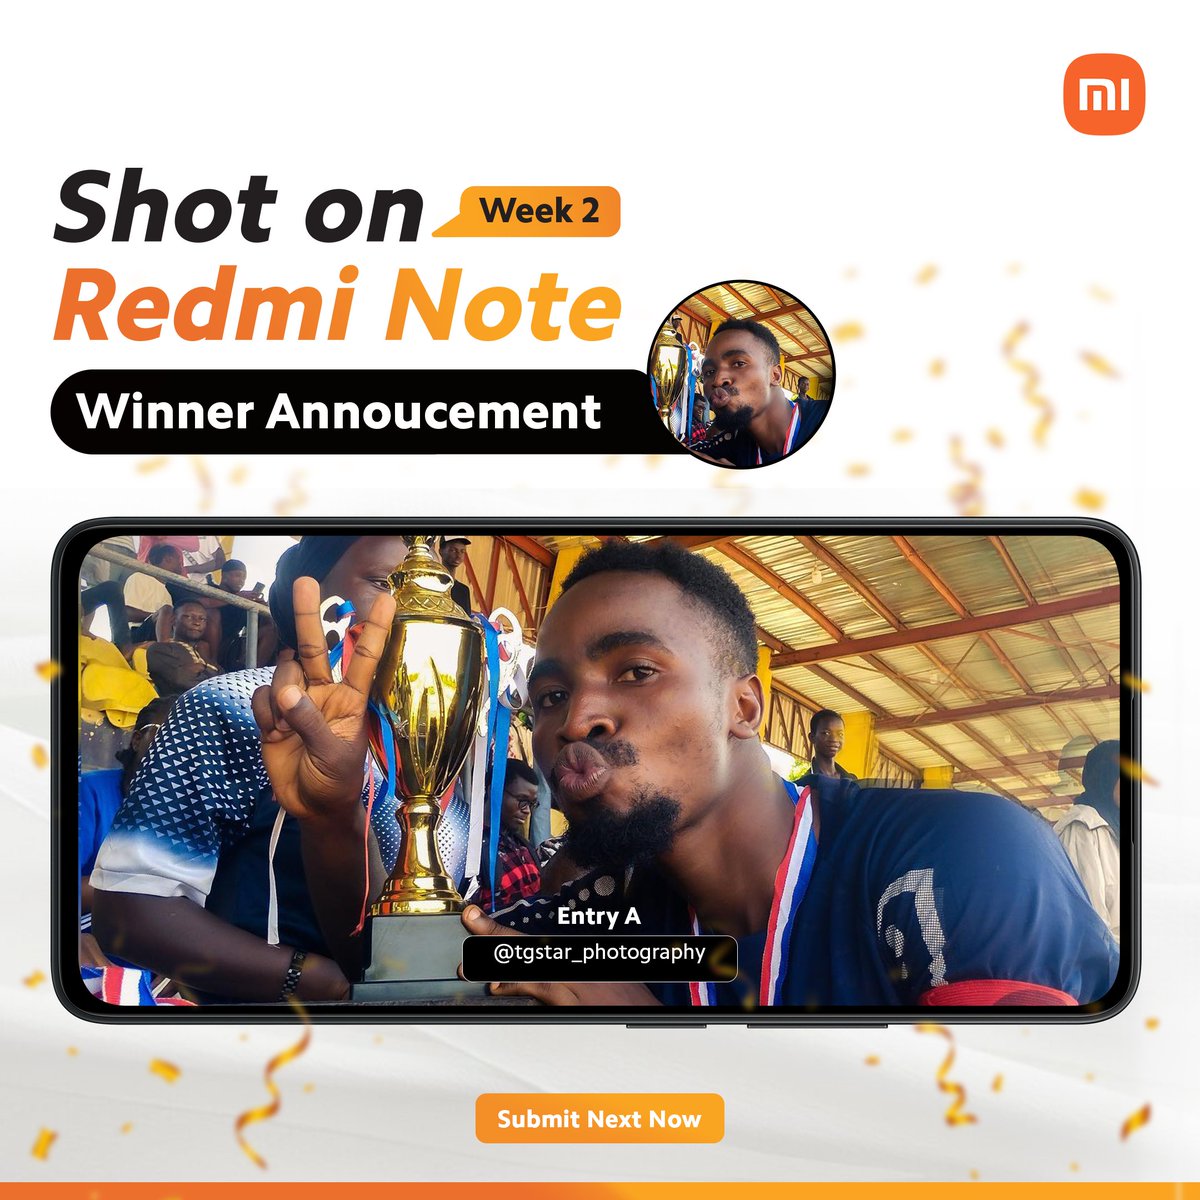 The votes are in and Entry A takes the prize in our Iconic moment theme for the #ShotOnRedmiNote campaign. Thanks to everyone who voted!

Don’t forget to check the pinned post for this week’s photography theme and join the fun! 📌

#EveryShotIconic 
#ShotOnRedmiNote